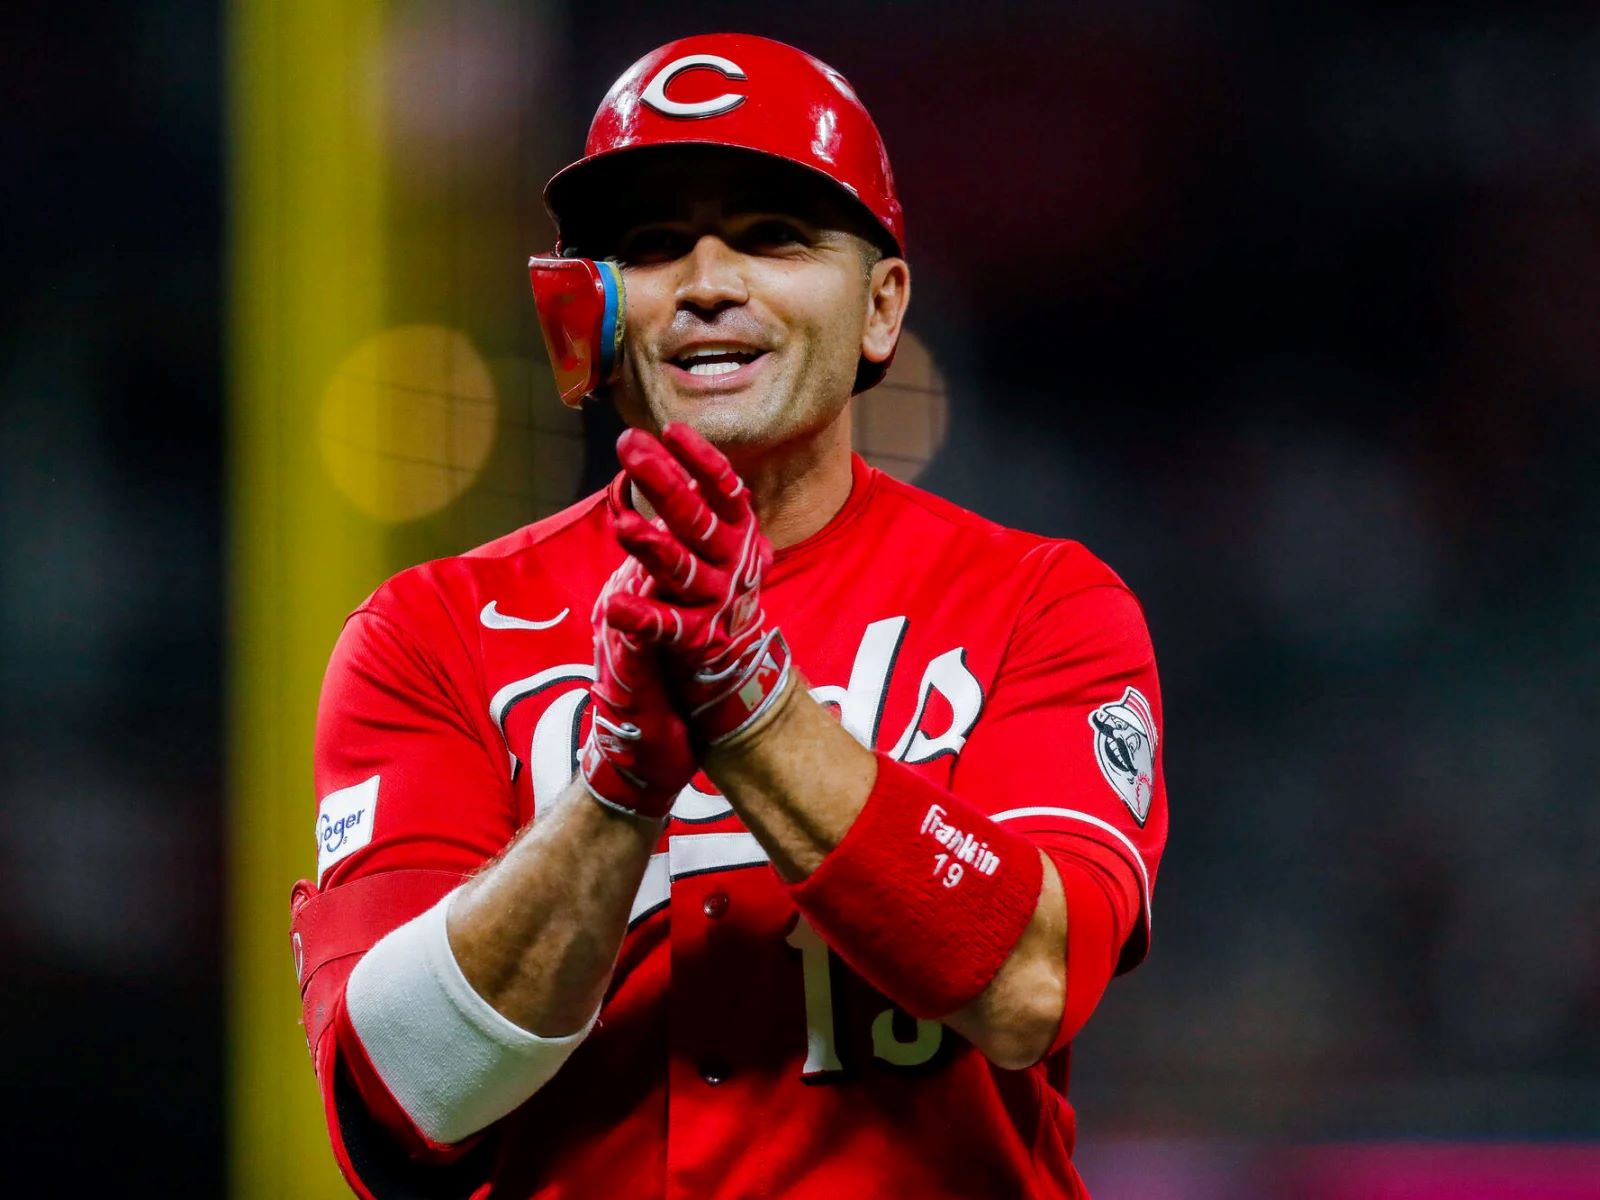 Joey Votto Lends Vocals For “The Spongebob Musical” At Local Children’s Theater